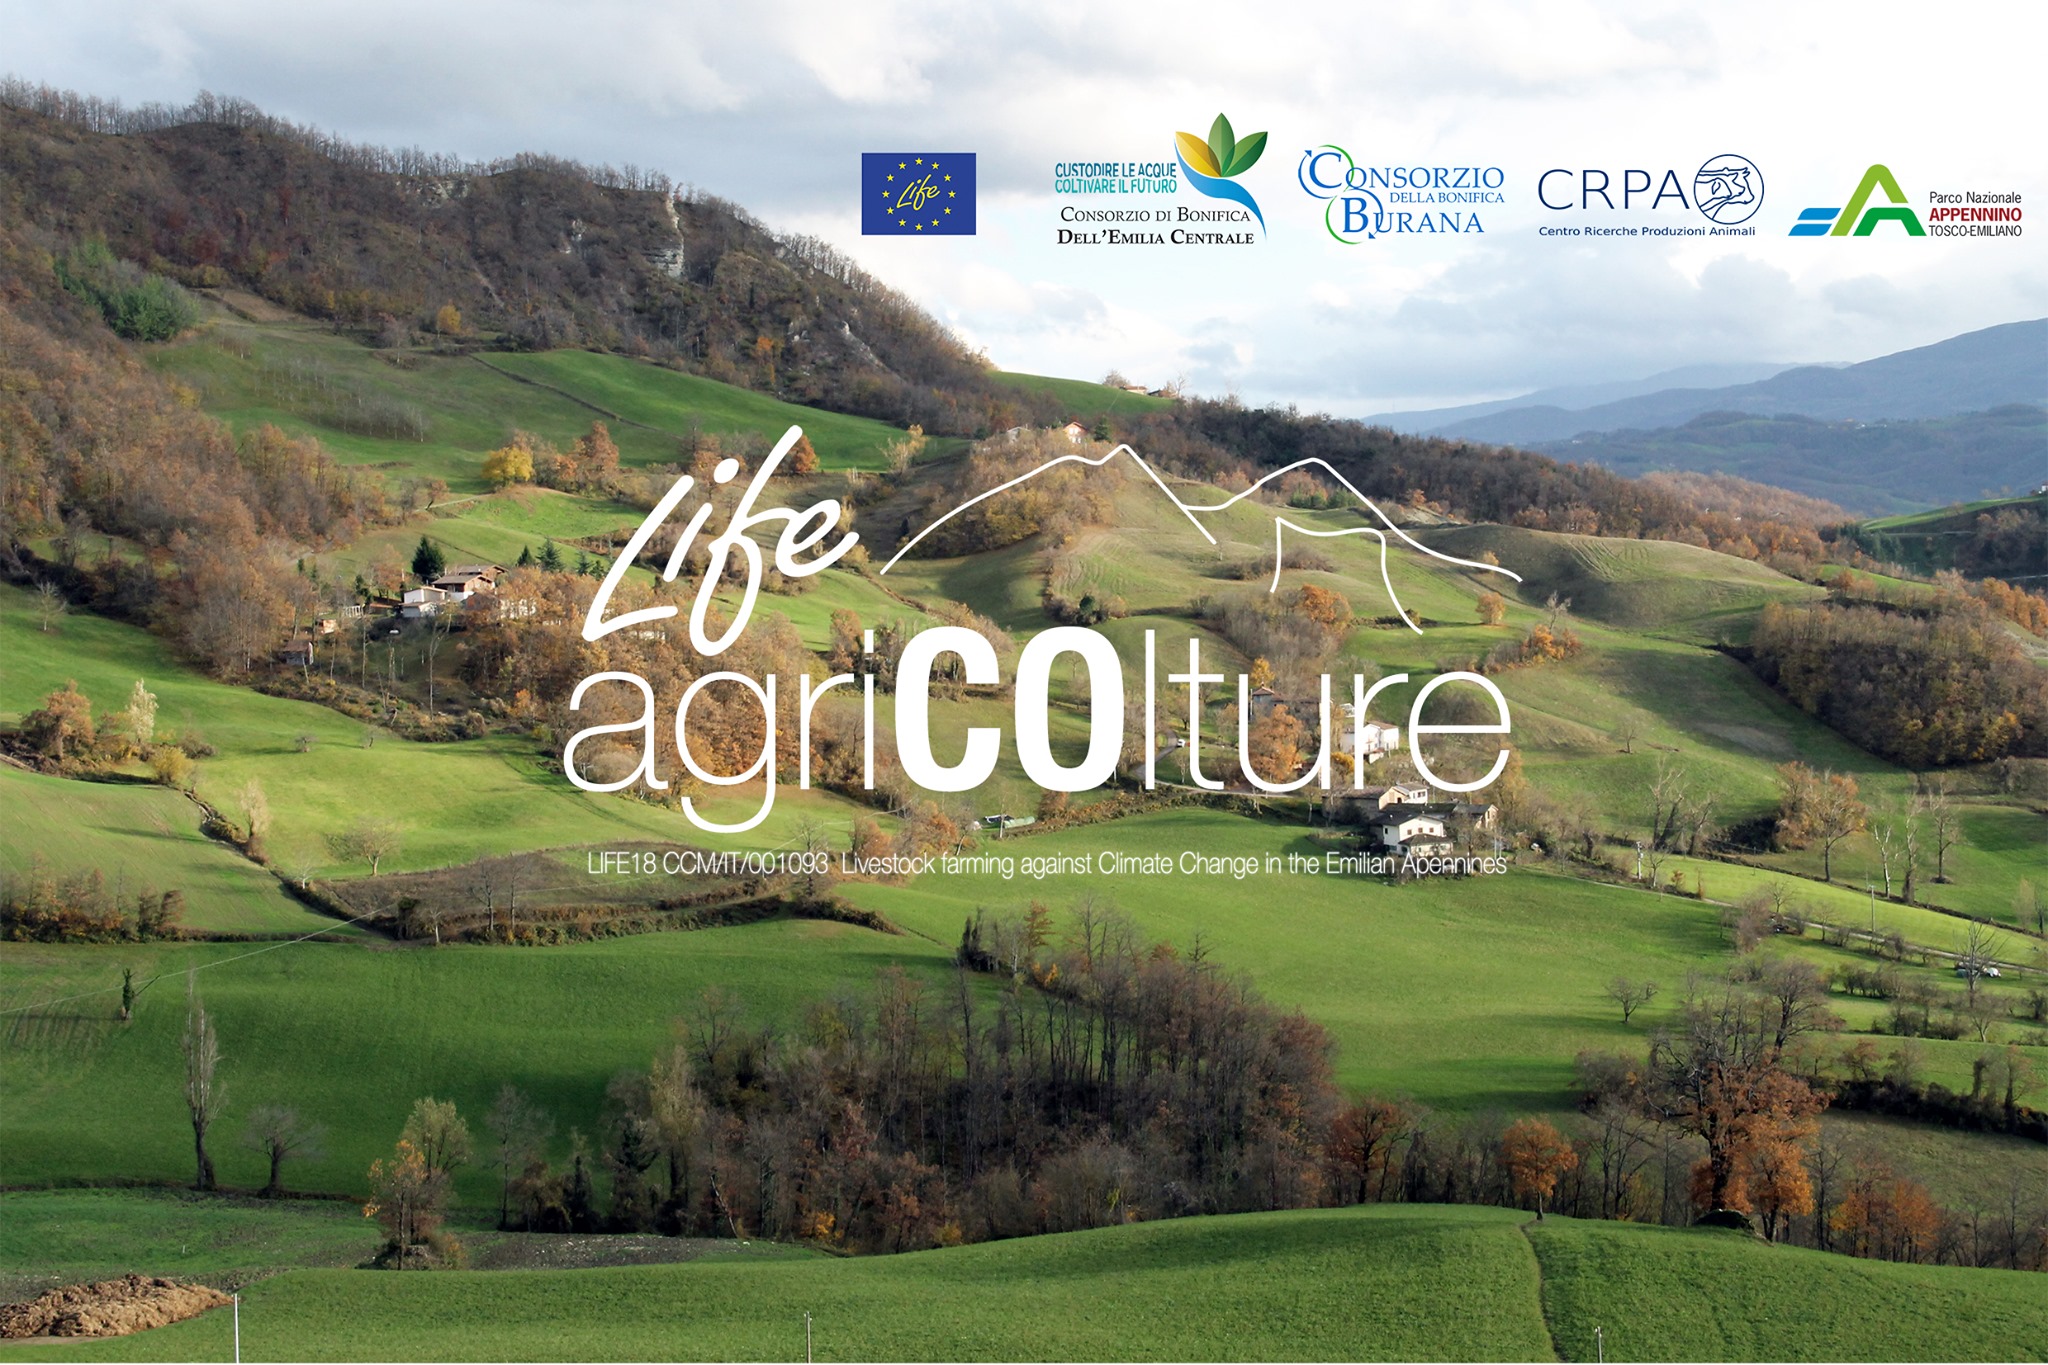 Livestock farming against climate change problems posed by soil degradation in the Emilian Apennines-image